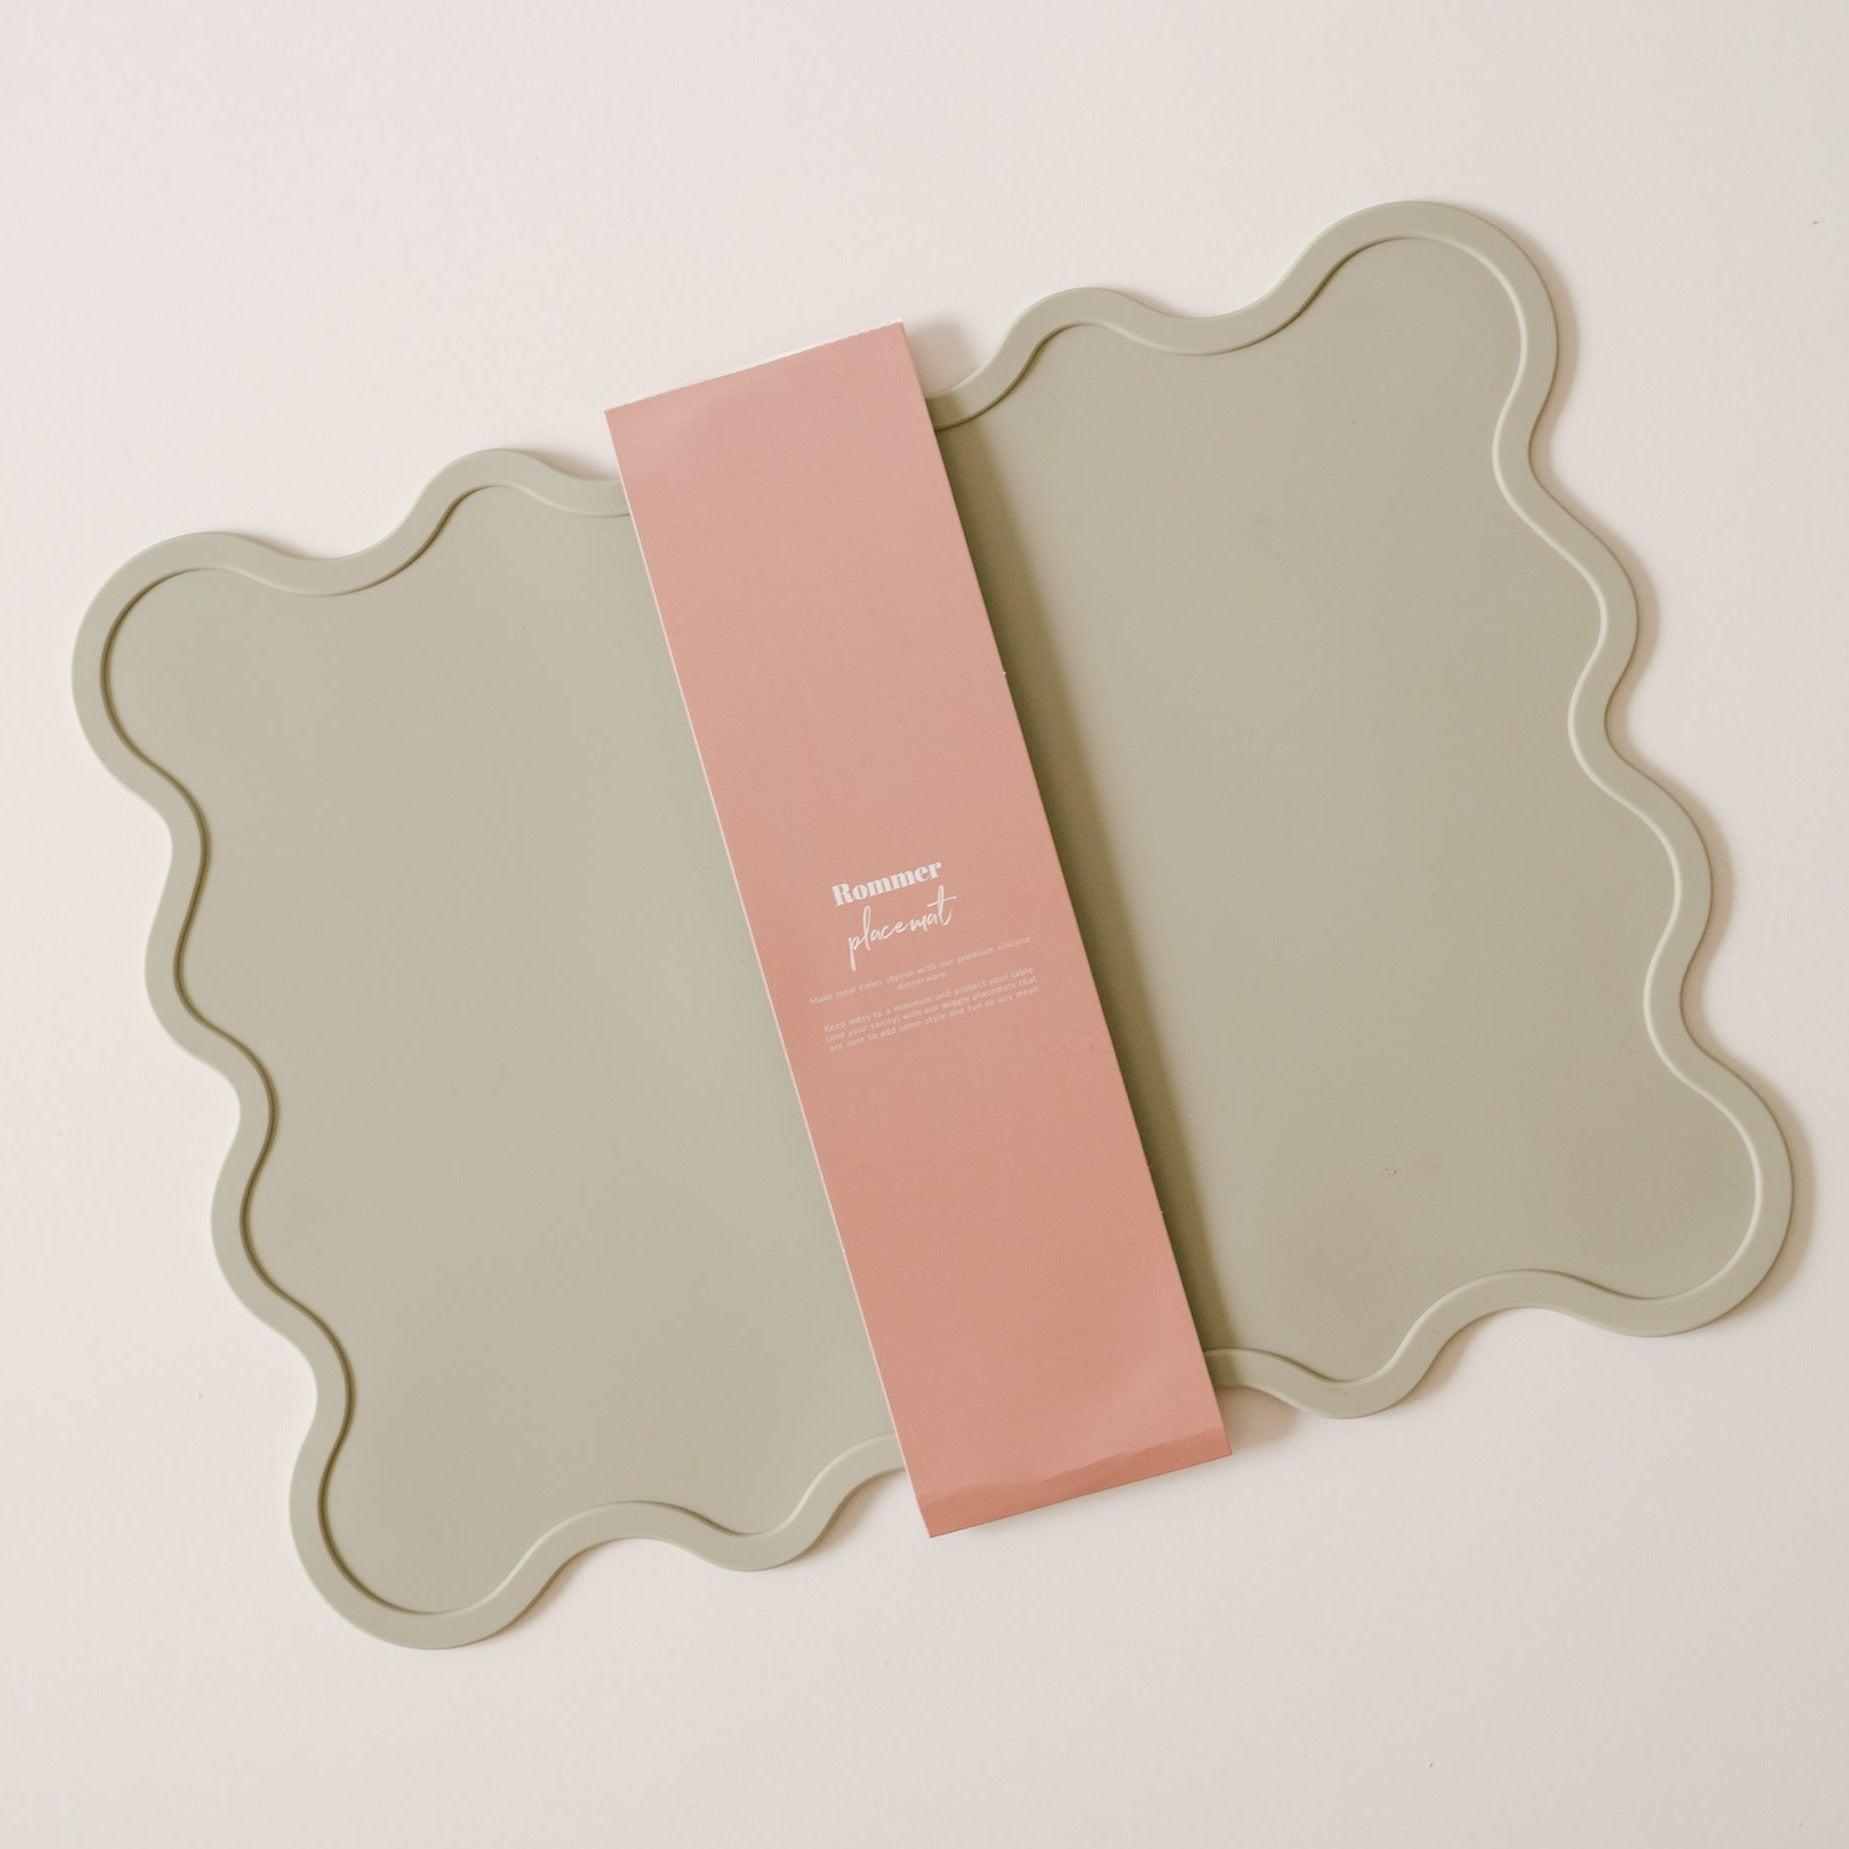 A Wiggly placemat in oyster colors on a white surface by Rommer.